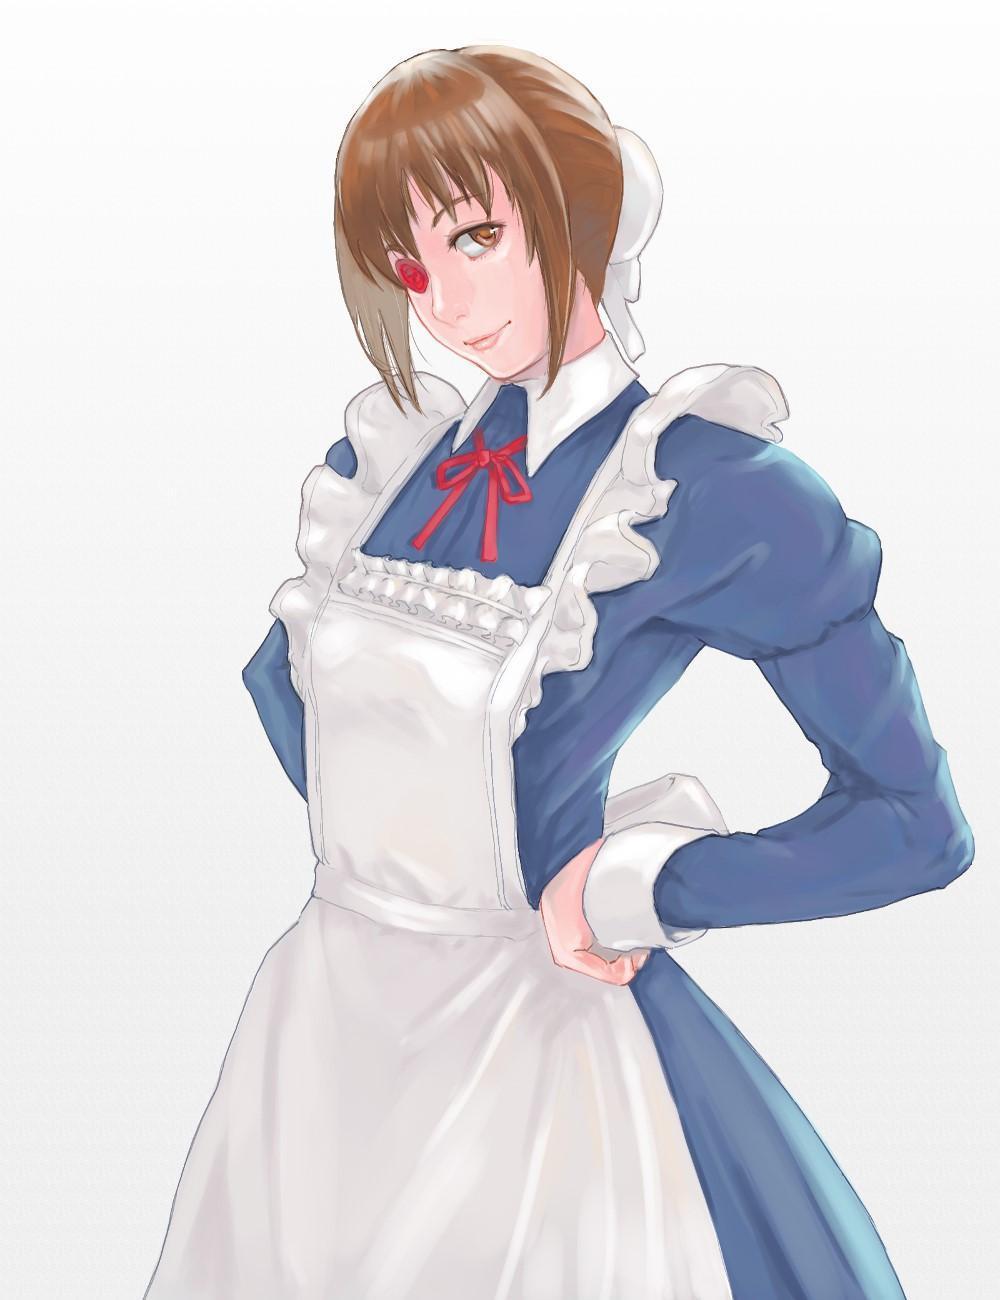 HD wallpaper, Fan Art, Brunette, Long Hair, Tsubame Kamoi, Smiling, Brown Eyes, Curvy, 2D, Simple Background, Looking At Viewer, Eyepatches, Maid Outfit, Anime, Hands On Hips, Anime Girls, Vertical